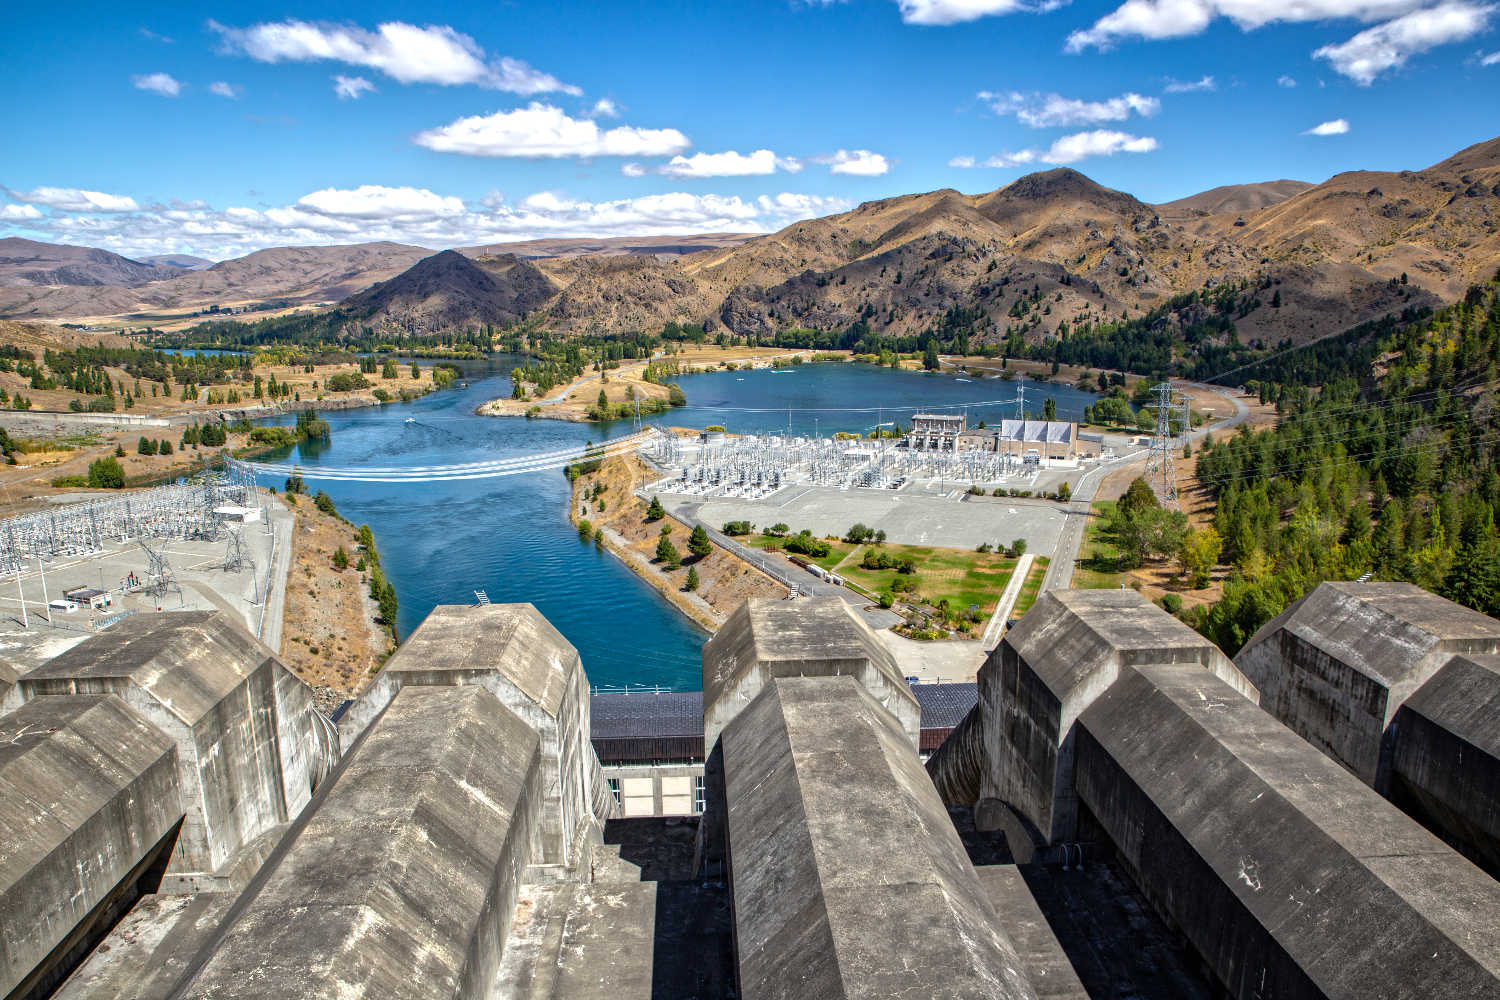 The view of the concrete pipes going to the power station at Benmore Dam, Waitaki Valley, New Zealand